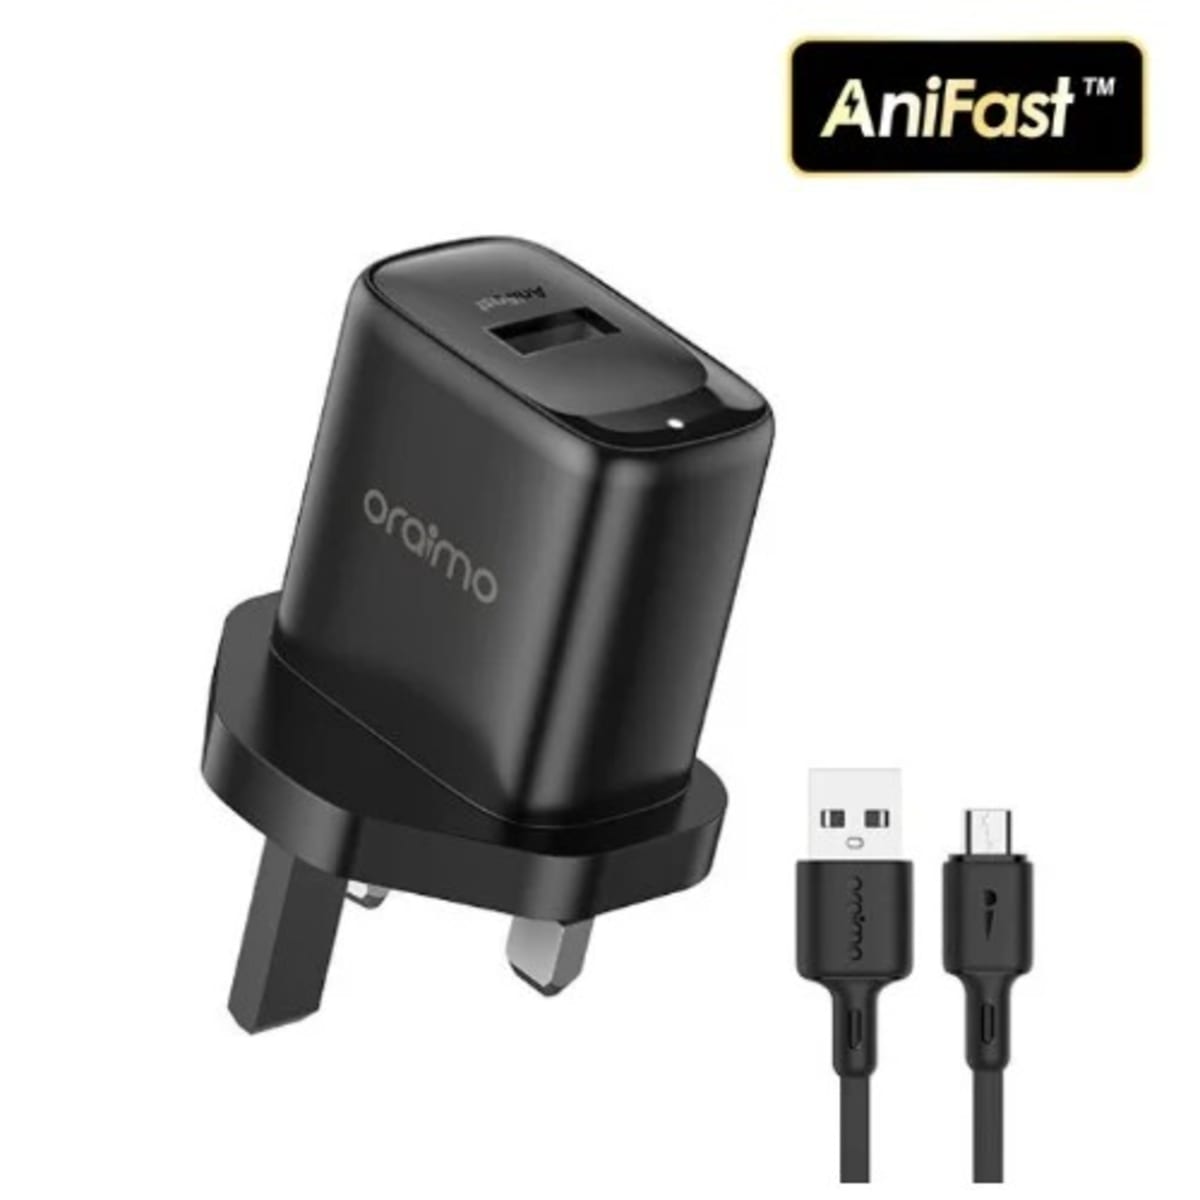 chargeur rapide oraimo charge rapide 5V-2A - Aness-Shop